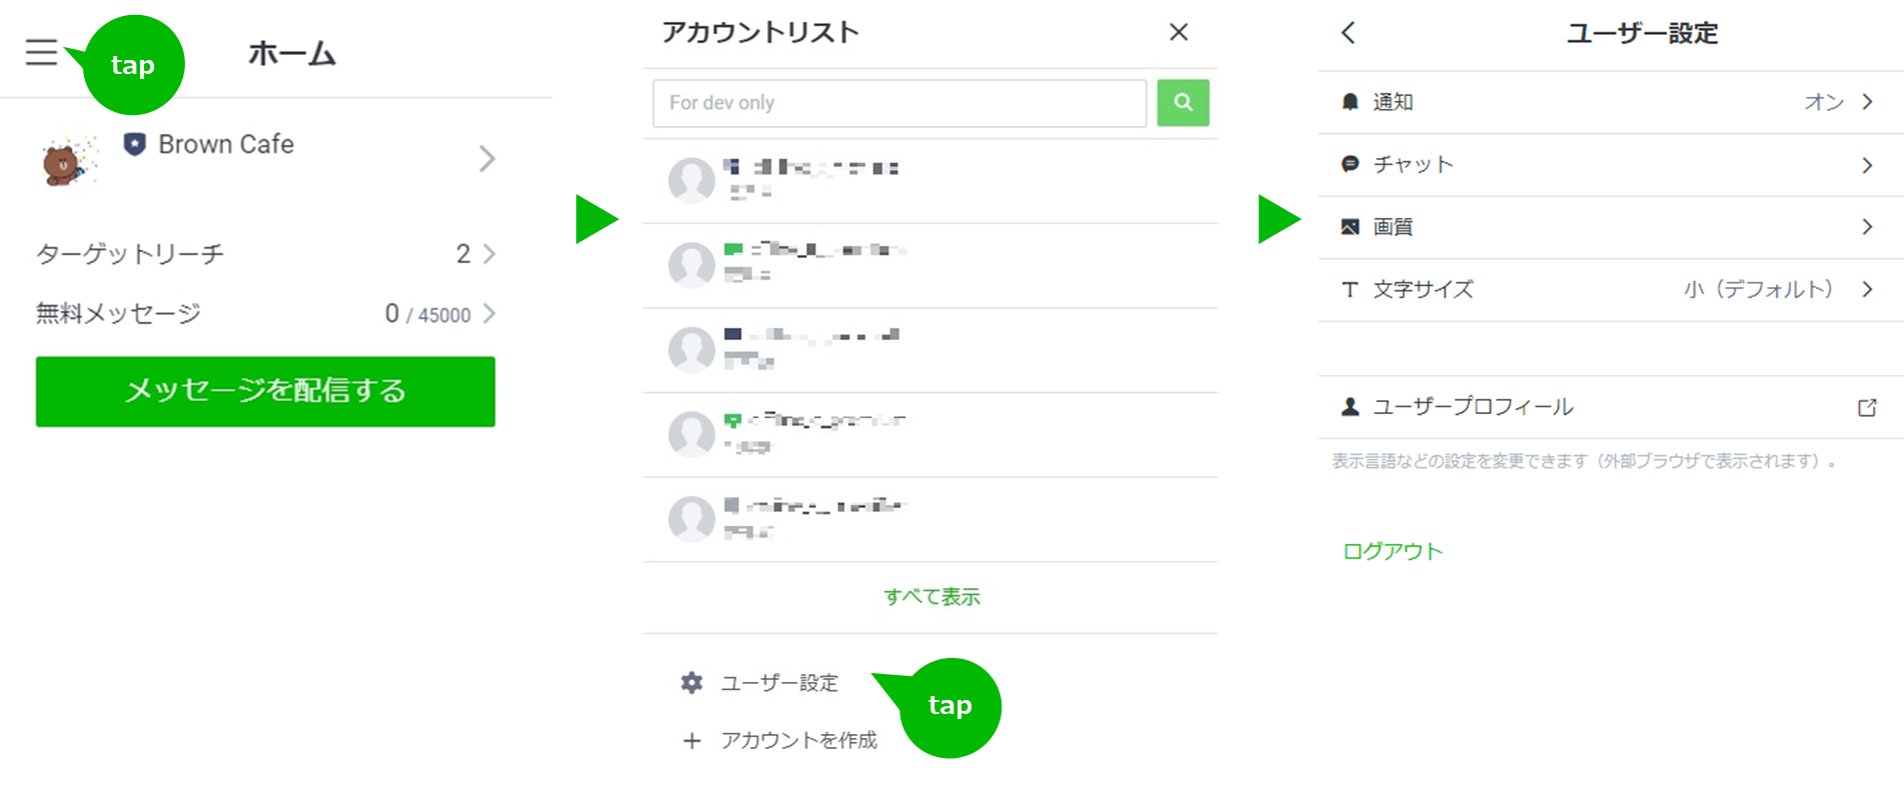 Line公式アカウント Line Official Account Manager 管理画面の構成 ホーム画面 マニュアル Line For Business